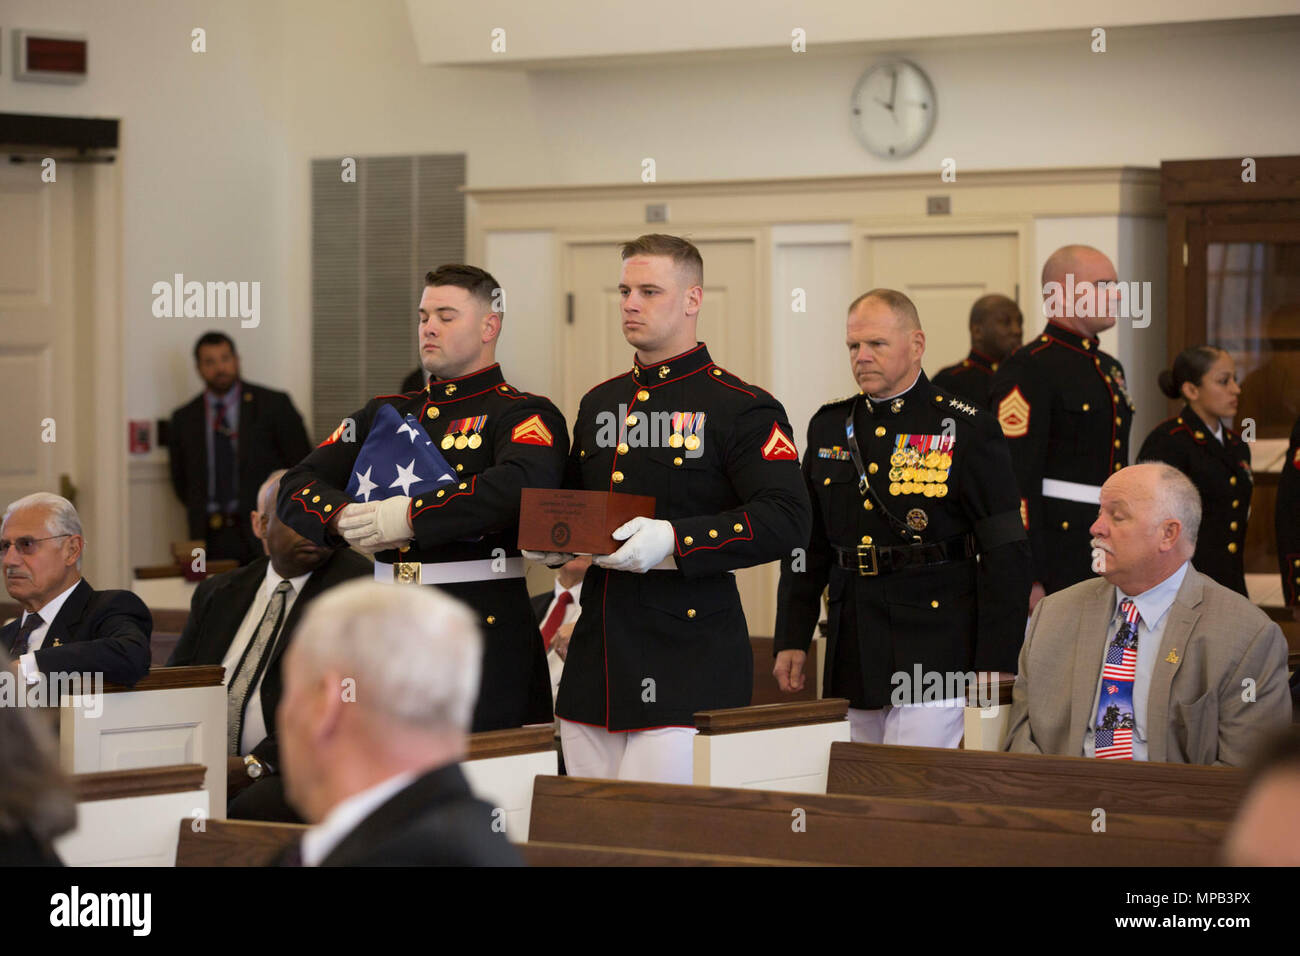 U.S. Marines with Marine Barracks Washington carry the remains of retired U.S. Marine Corps Lt. Gen. Lawrence F. Snowden during his Memorial Service at the U.S. Marine Memorial Chapel, Quantico, Va., April 8, 2017. Snowden retired in 1979 after nearly 40 years of service, fought in engagements during World War II, the Korean War, and Vietnam. He passed away Feb. 18, 2017. He was prominently known after retirement for organizing joint 'Reunion of Honor' missions which is an opportunity for Japanese and U.S. veterans and their families, dignitaries, leaders and service members from both nations  Stock Photo